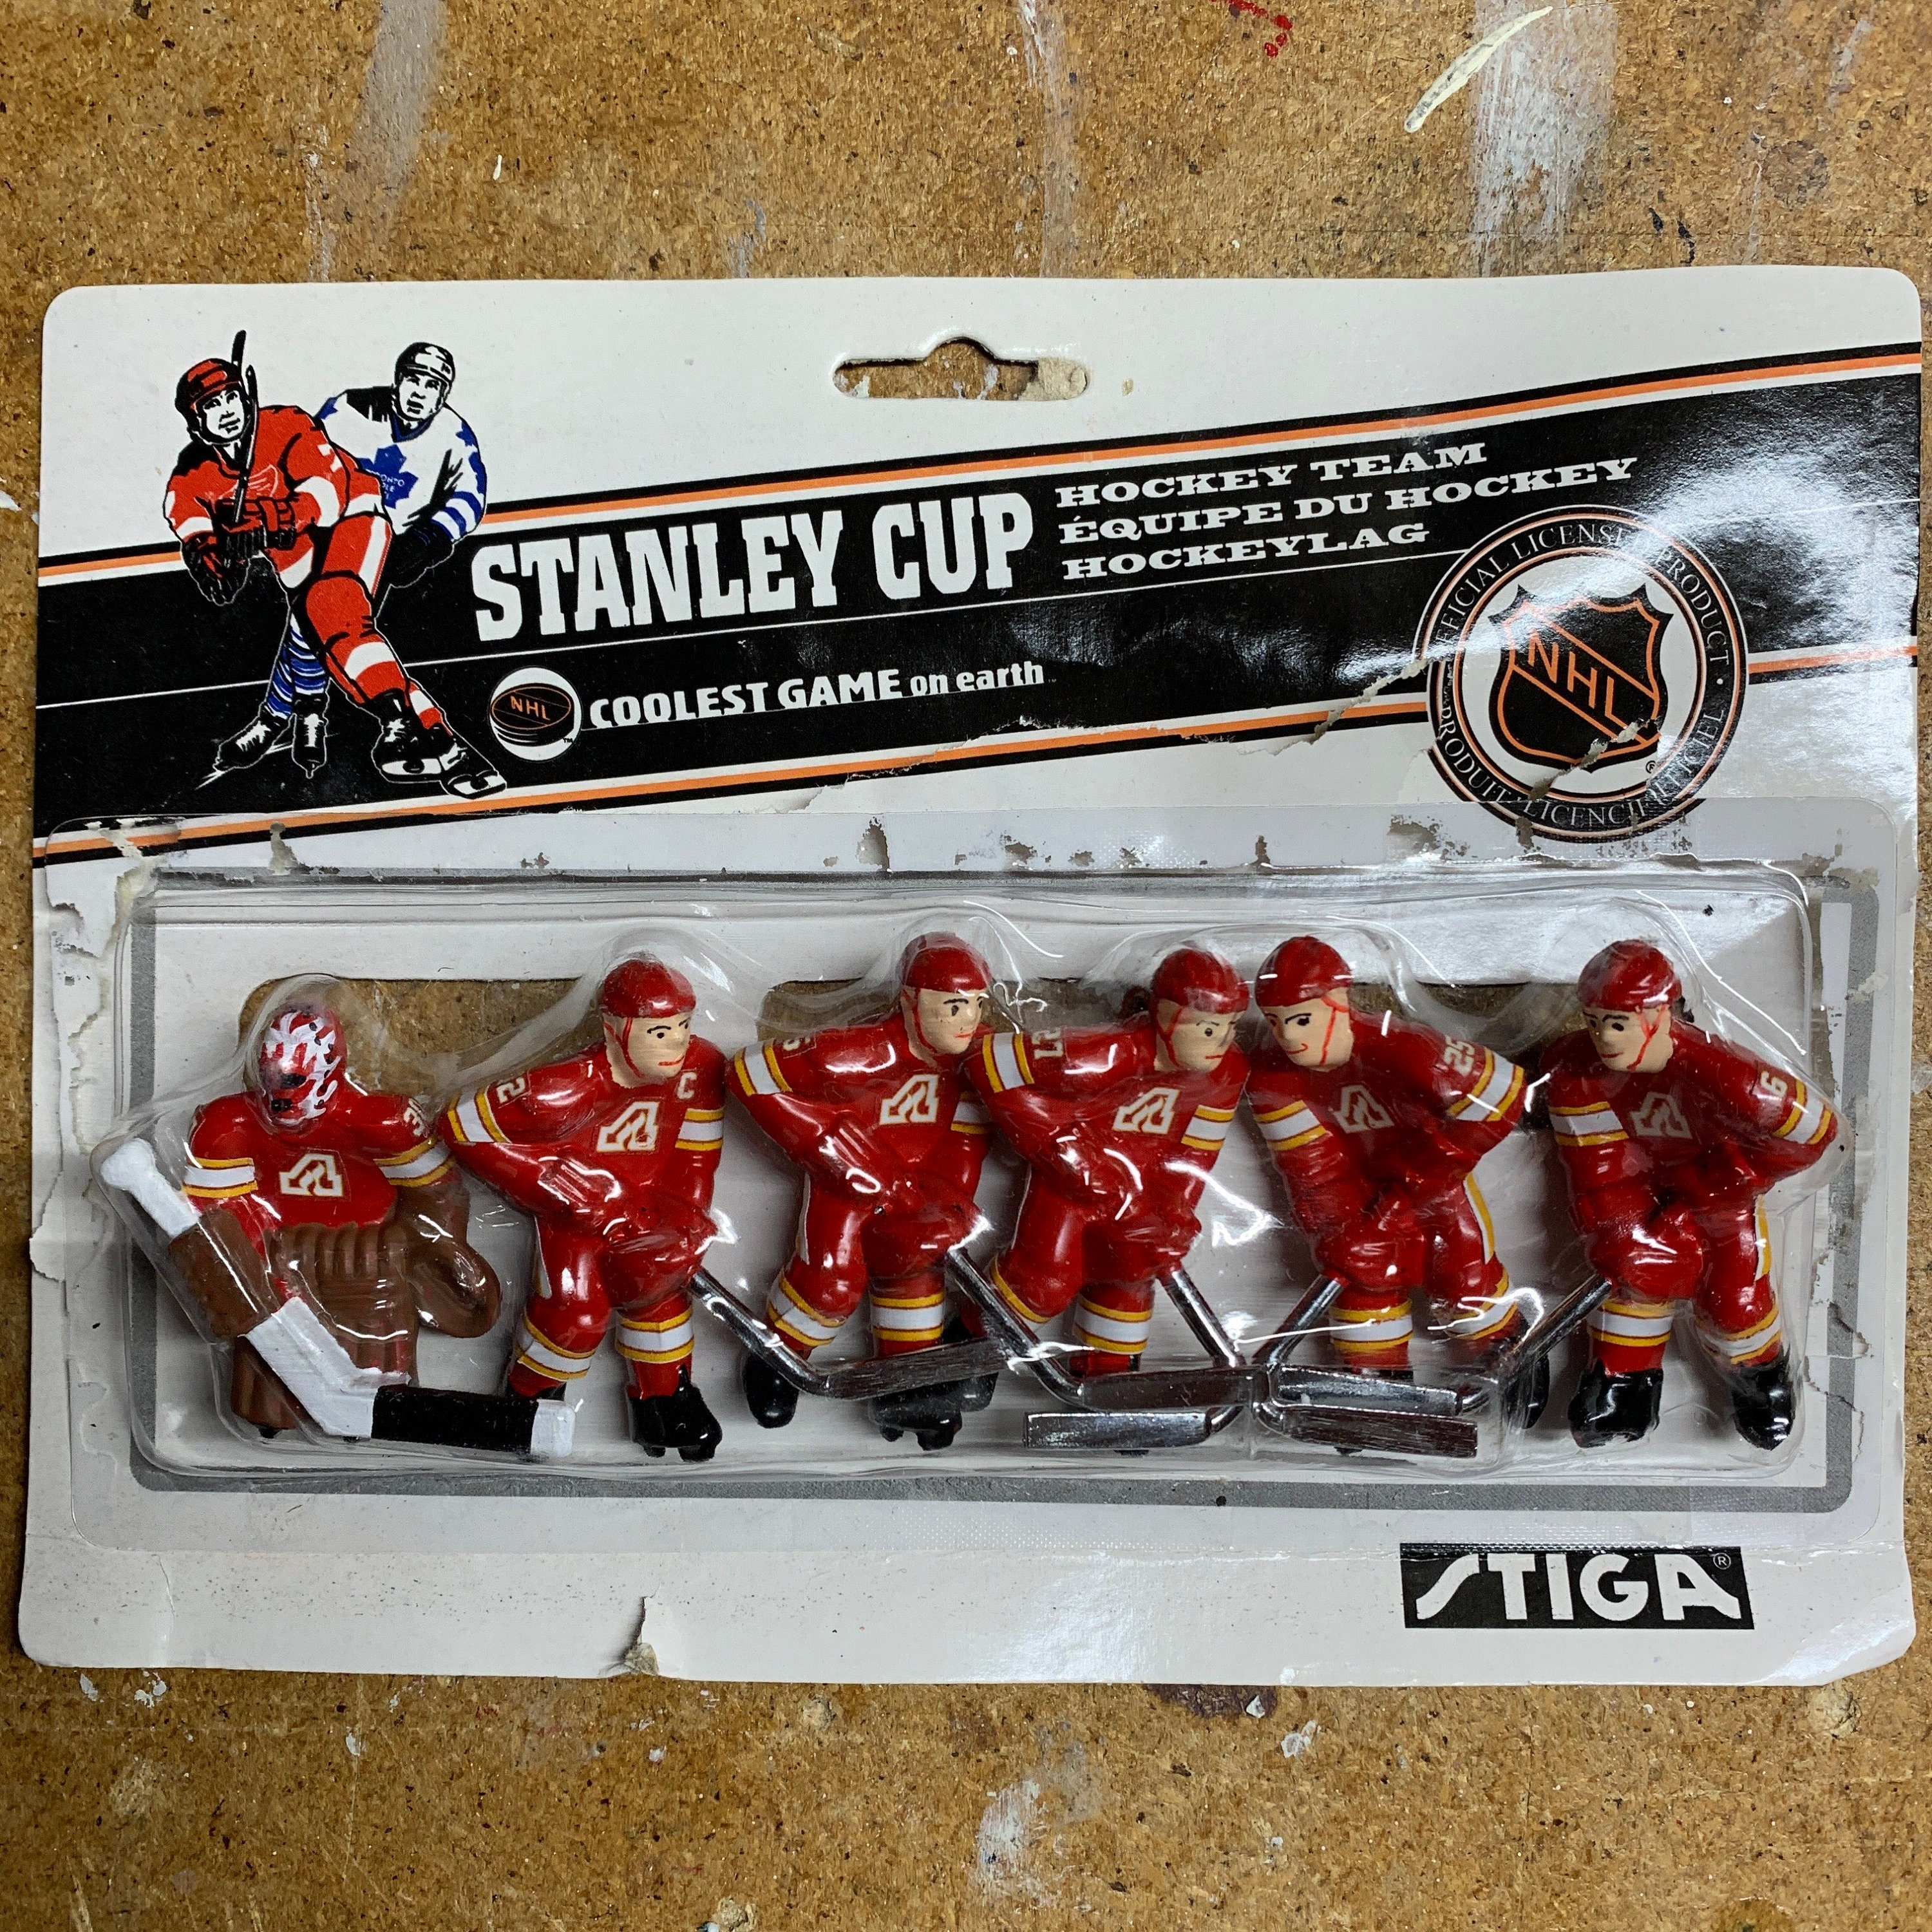 Stiga NHL Detroit Red Wings Table Top Hockey Game Players Team Pack